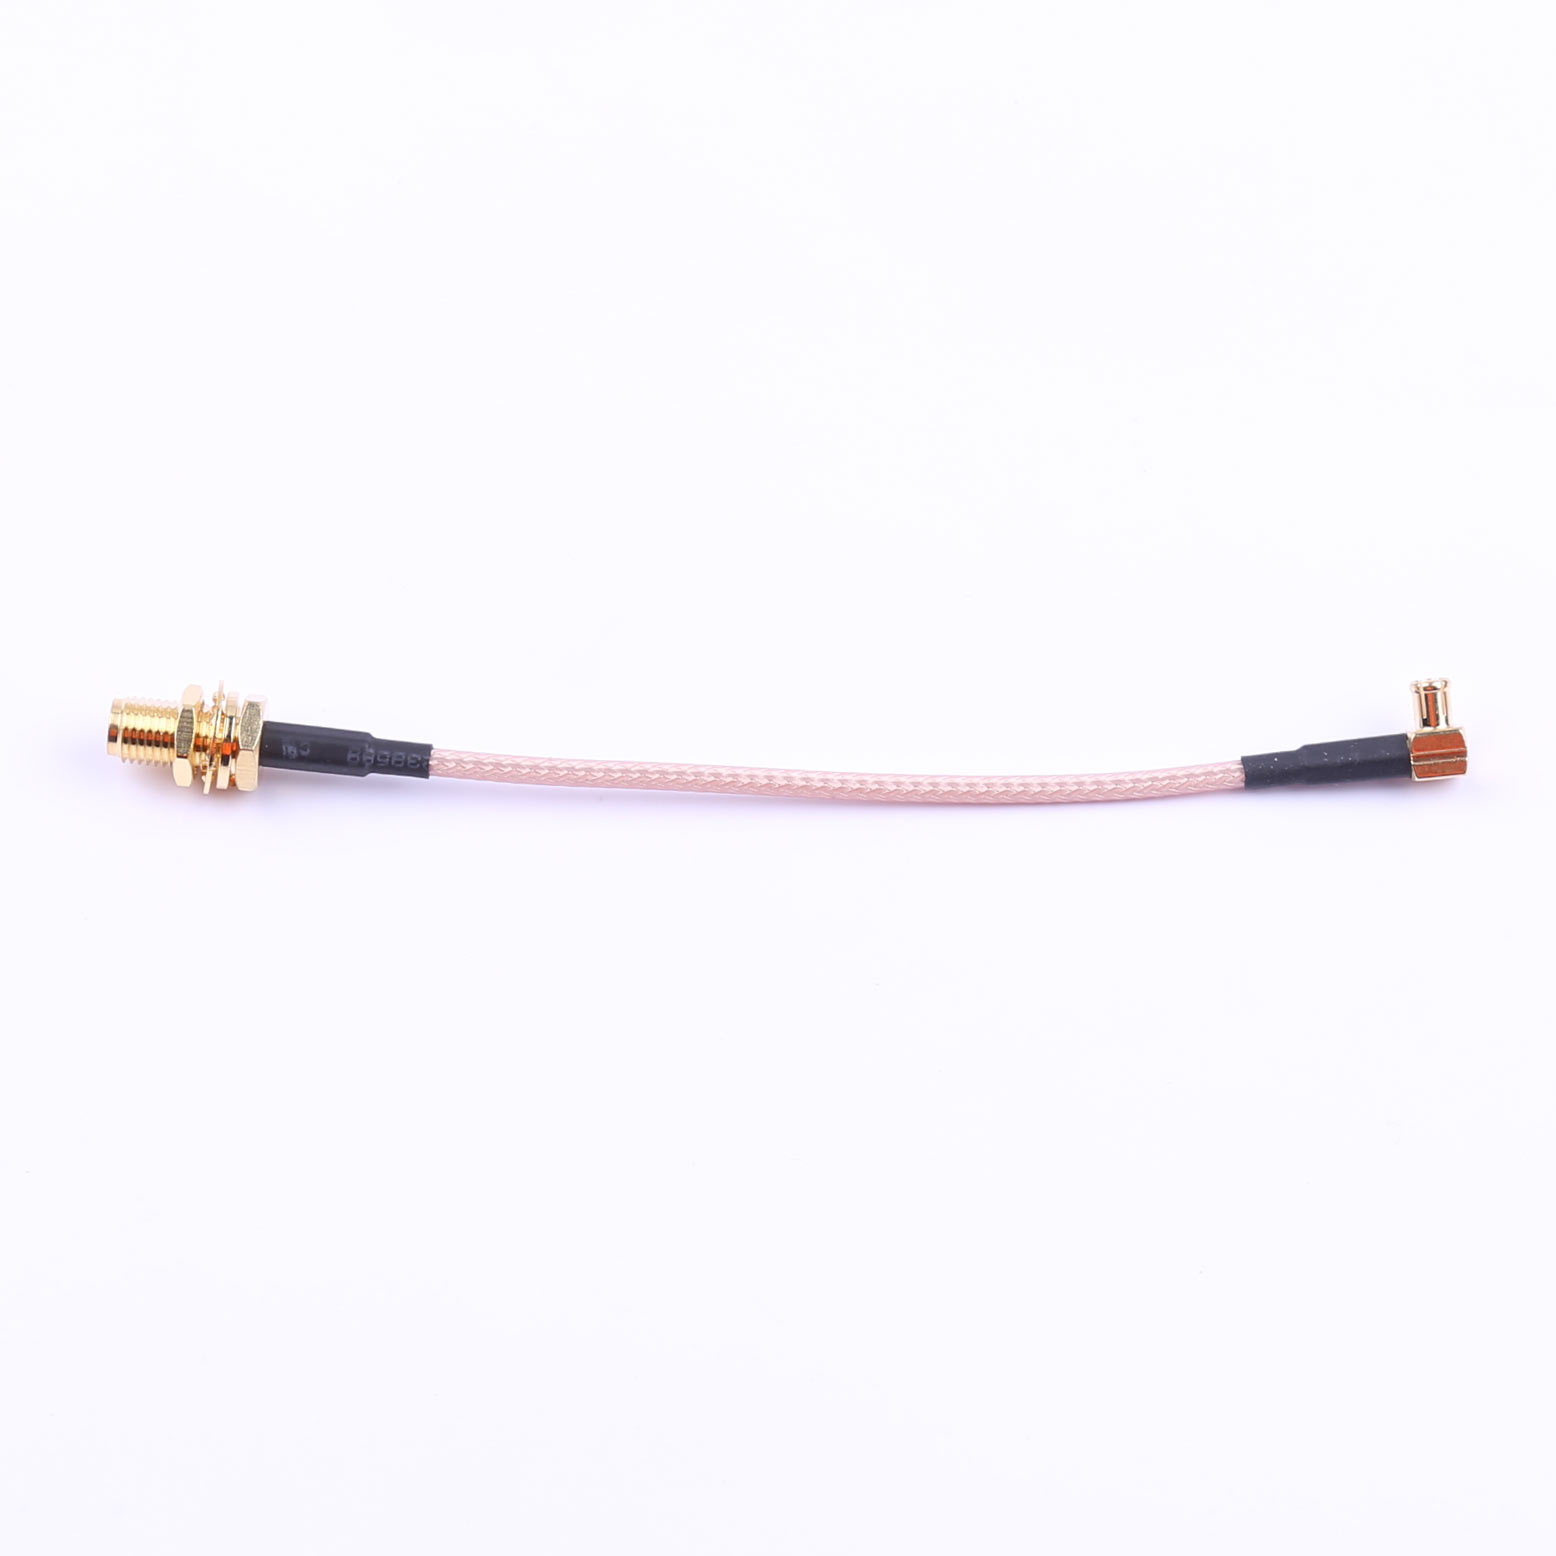 Kinghelm Rotor radio frequency cable, MCX to SMA gold-plated external thread inner hole, RG316, L 100mm (4-piece set) - KHB (RG316) -MCX-100-28